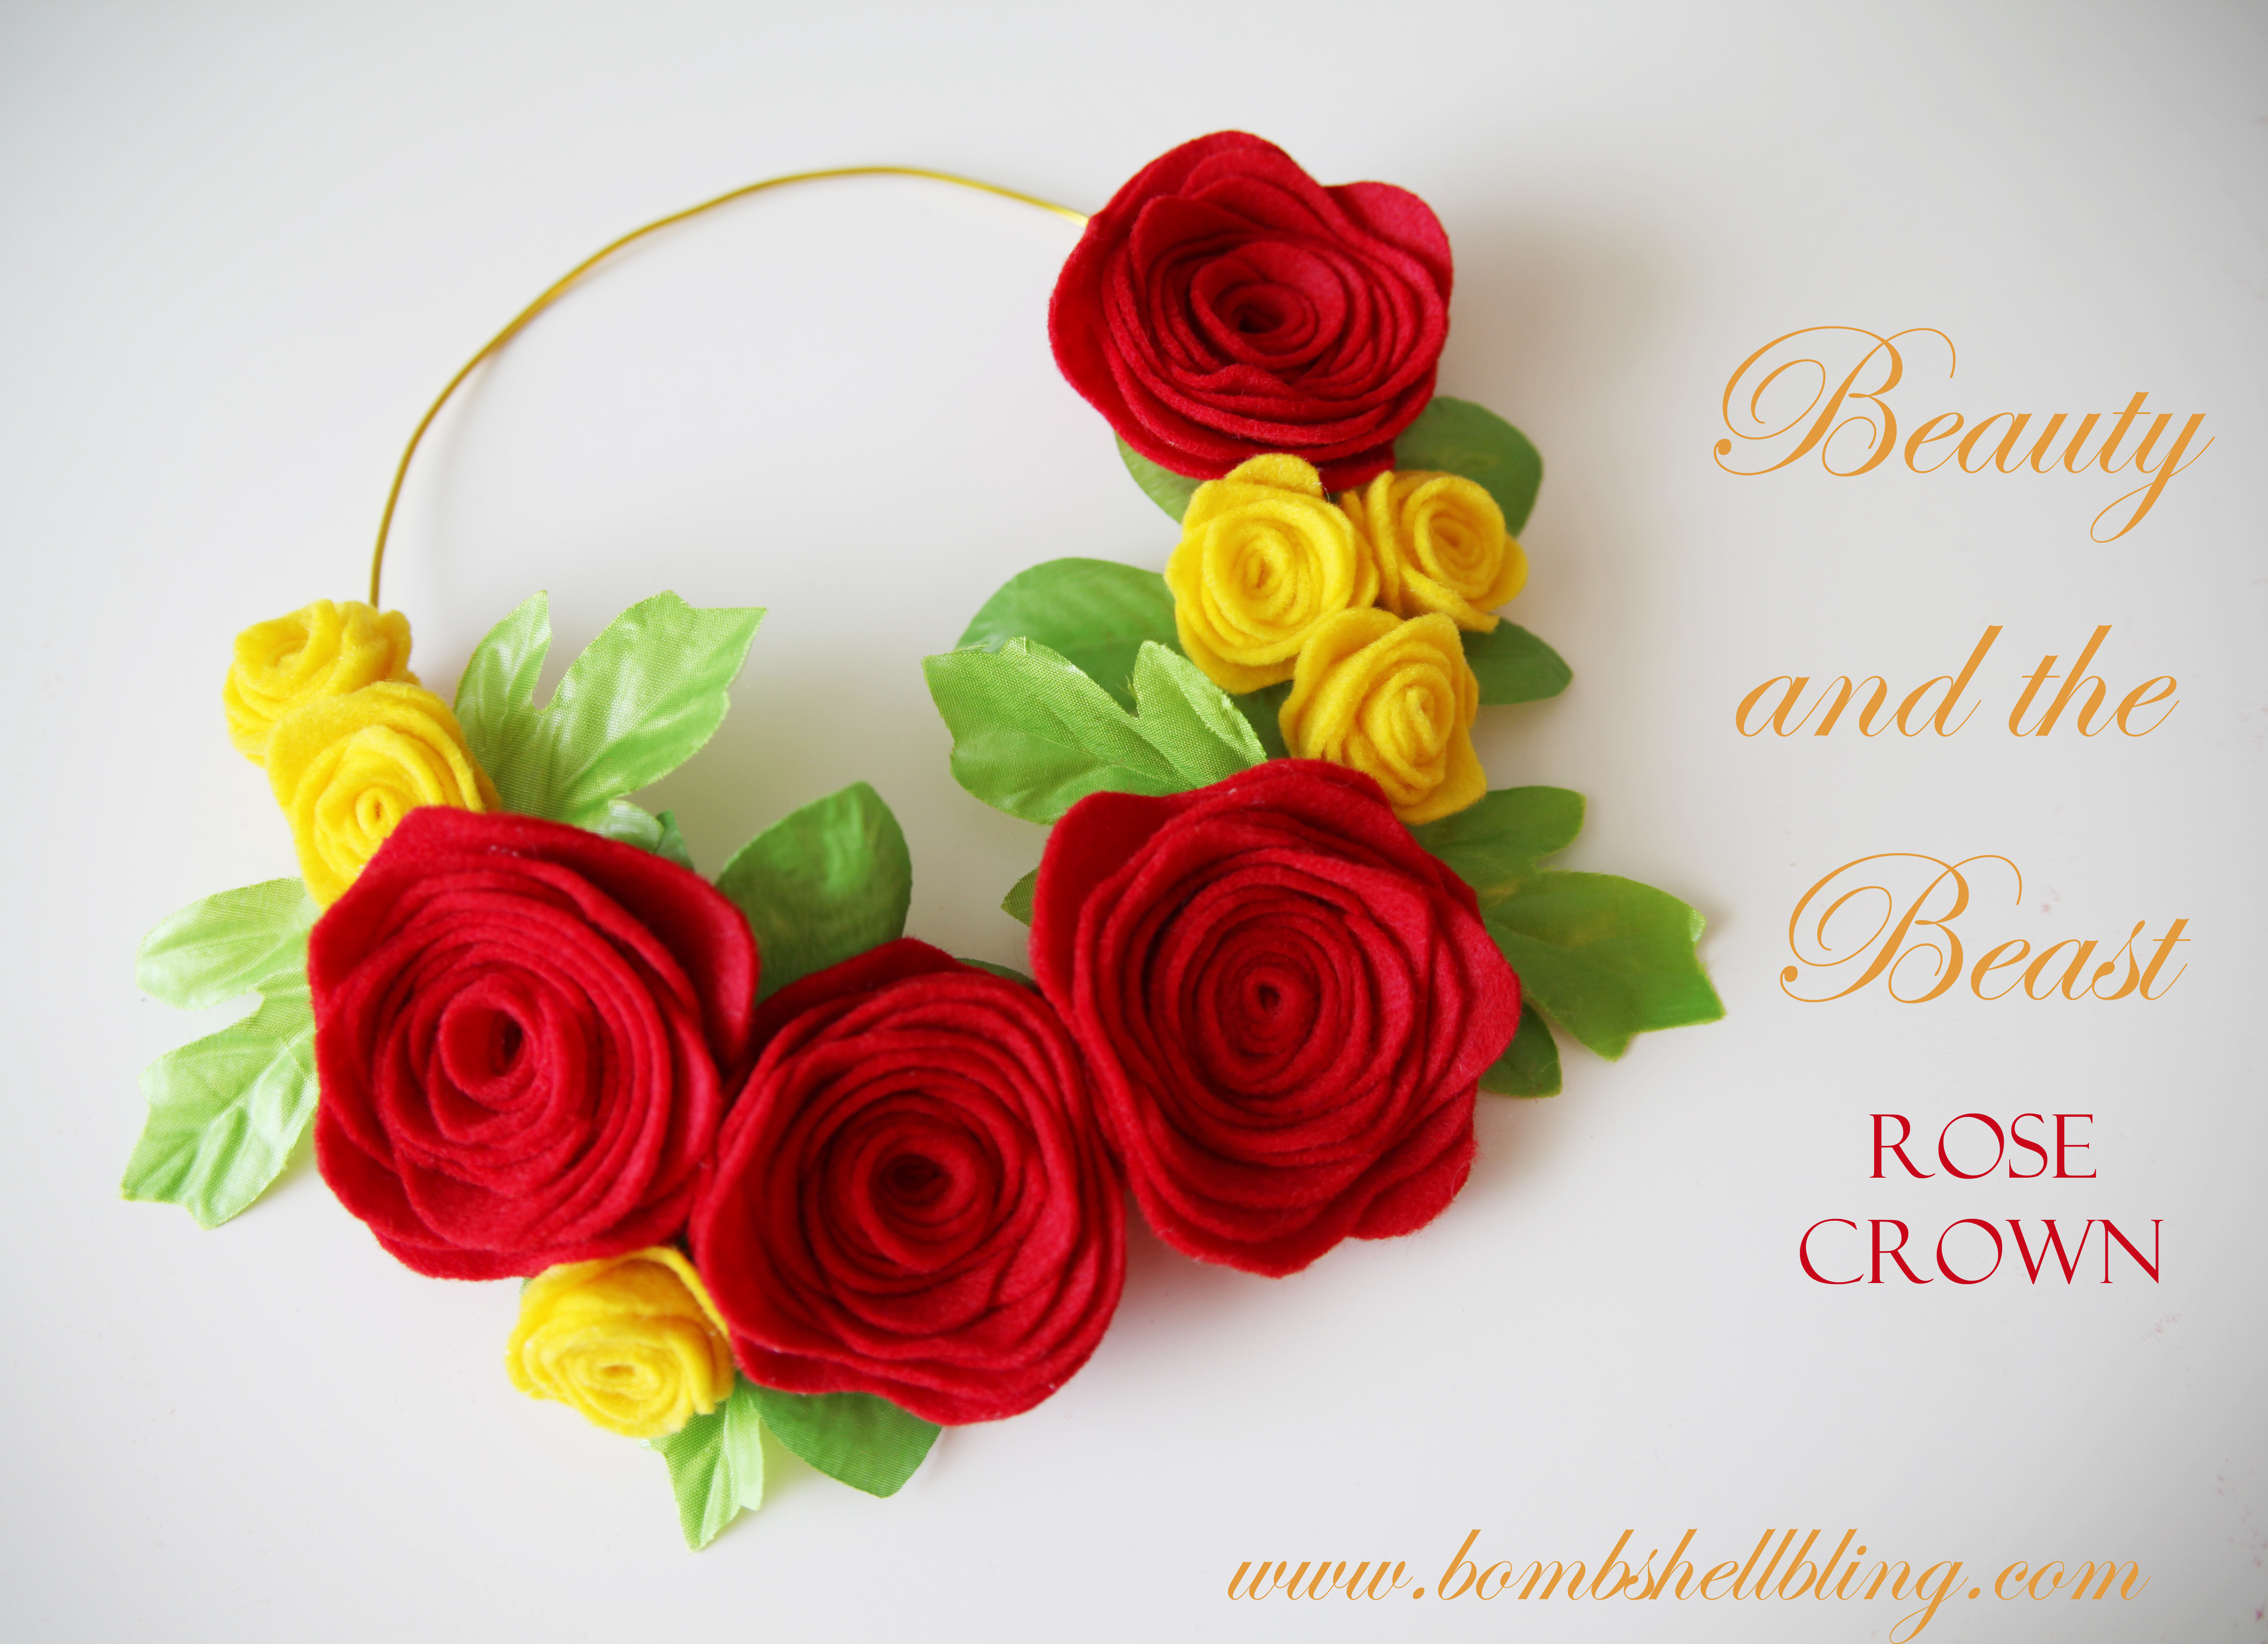 Beauty and the Beast Rose Crown